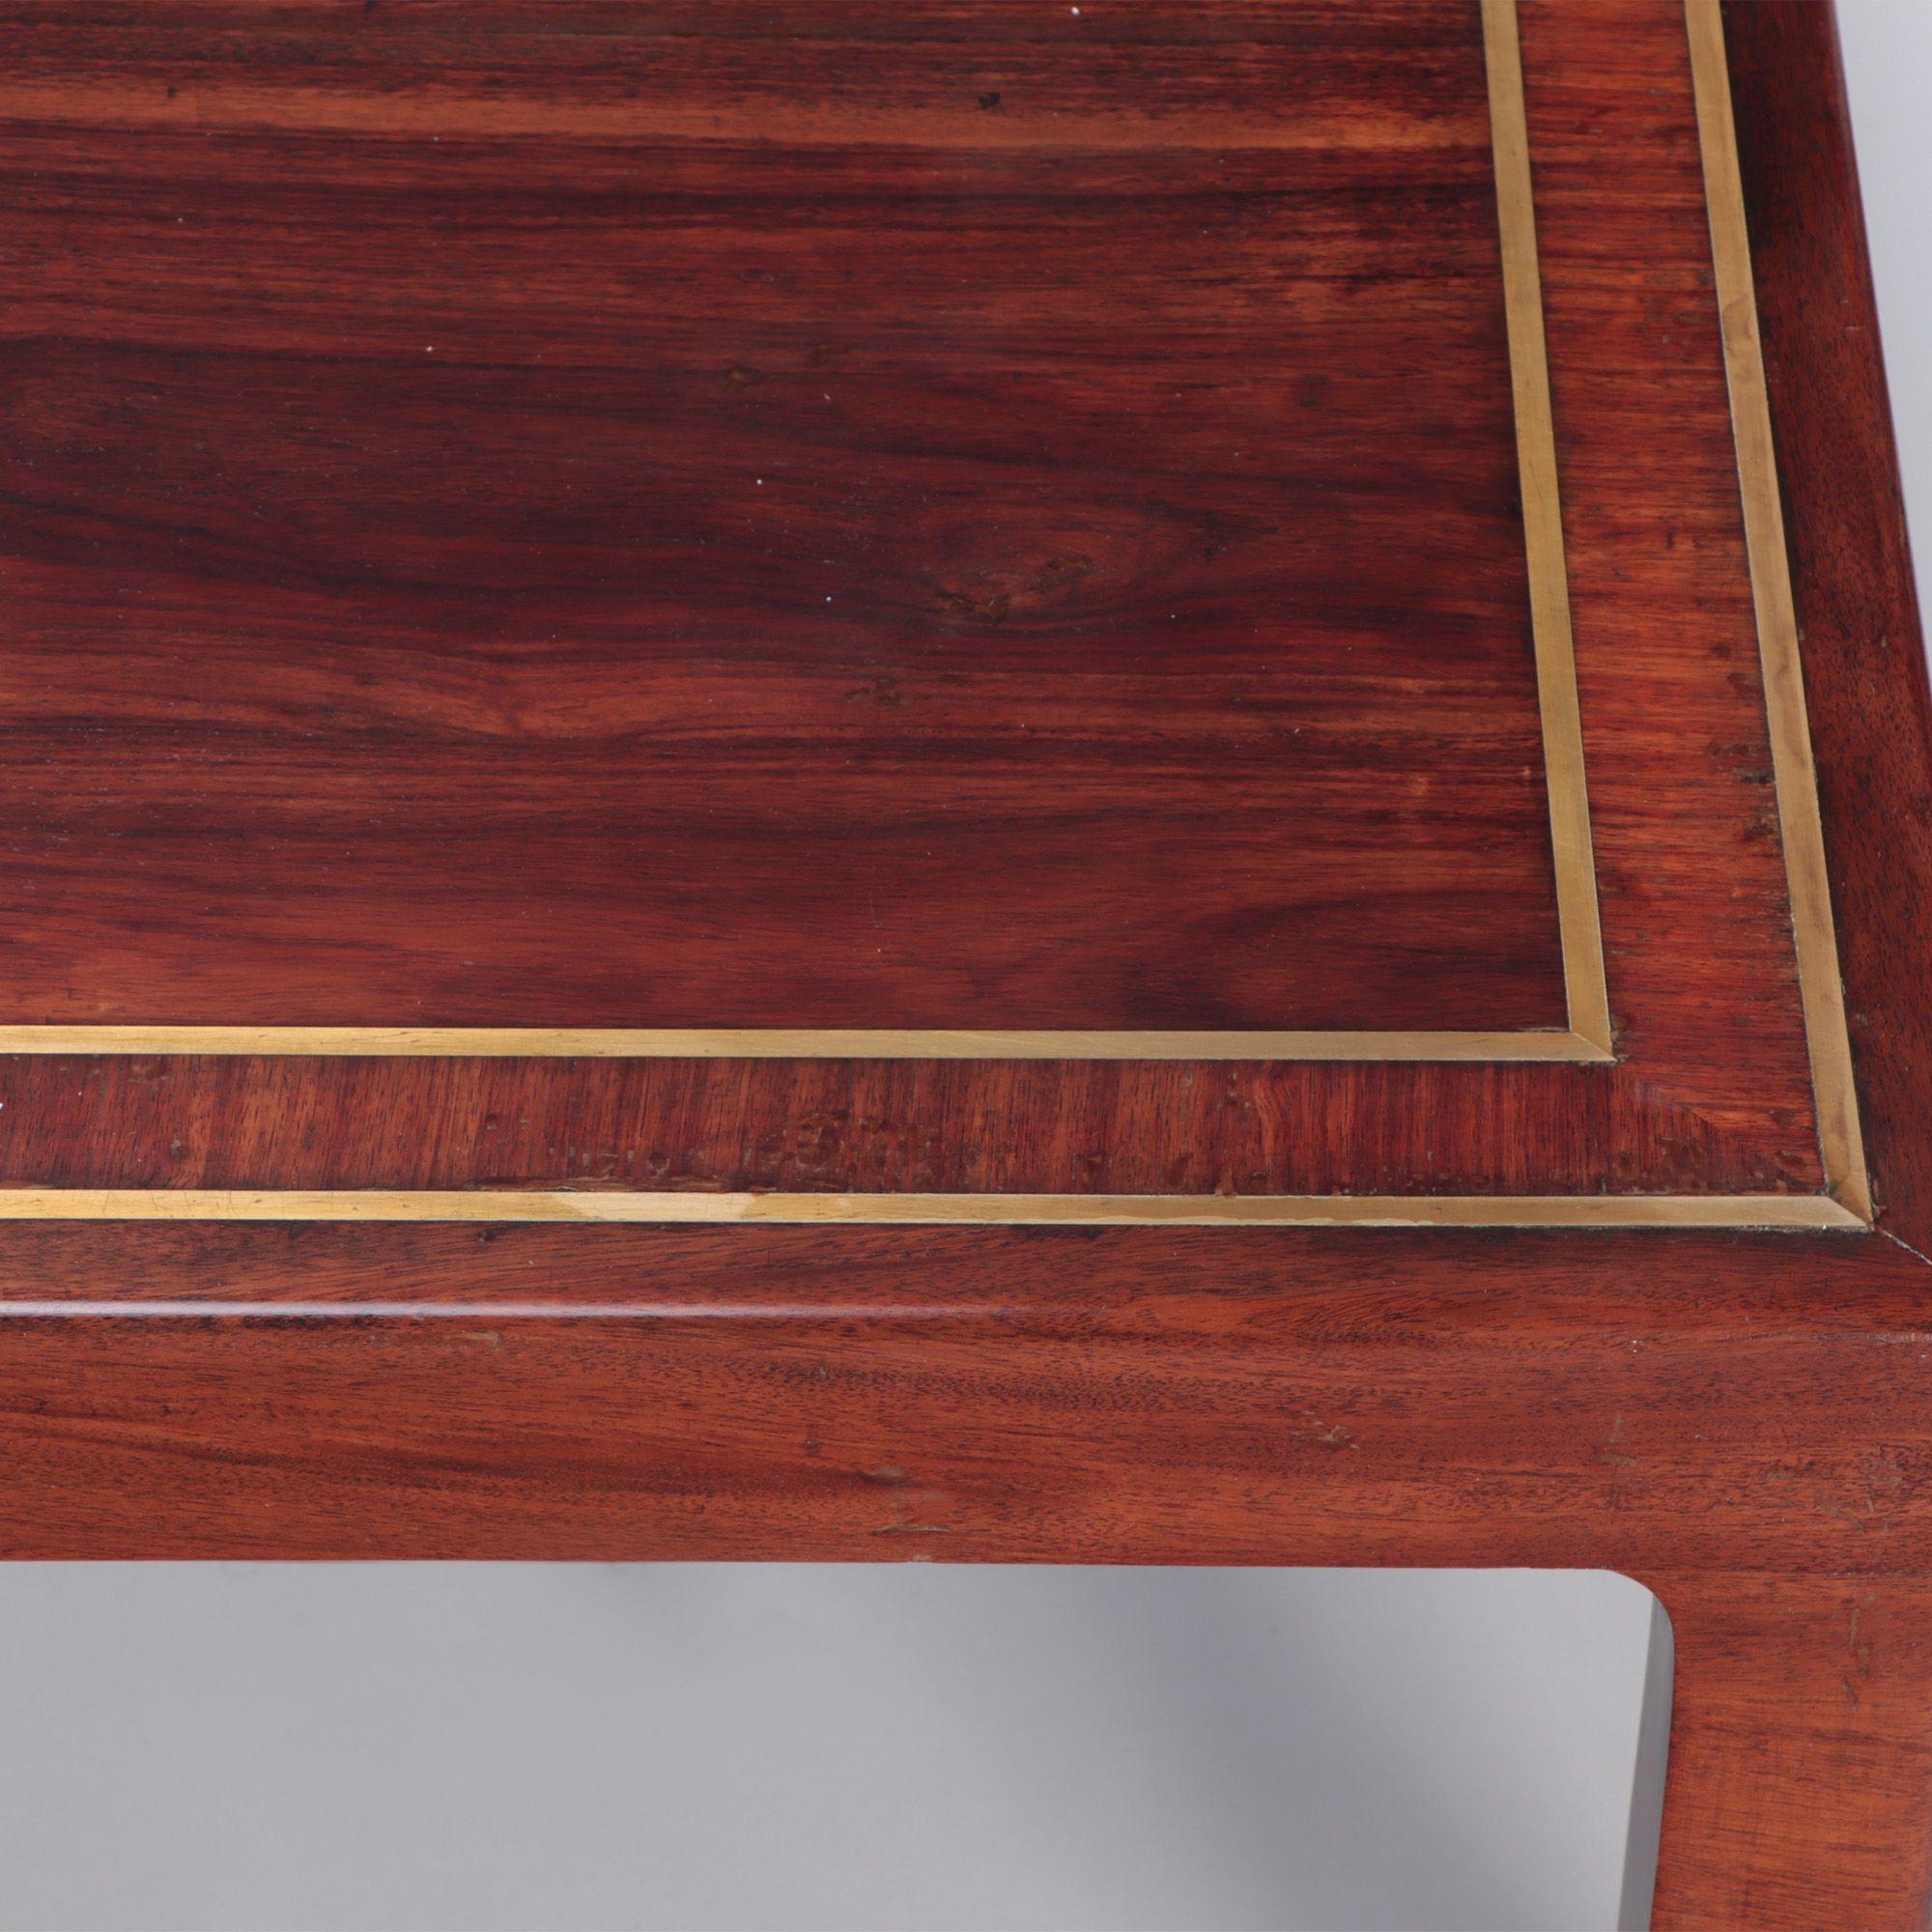 Late 20th Century Large Rosewood and Brass Inlaid Brazilian Coffee Table, C 1975 For Sale